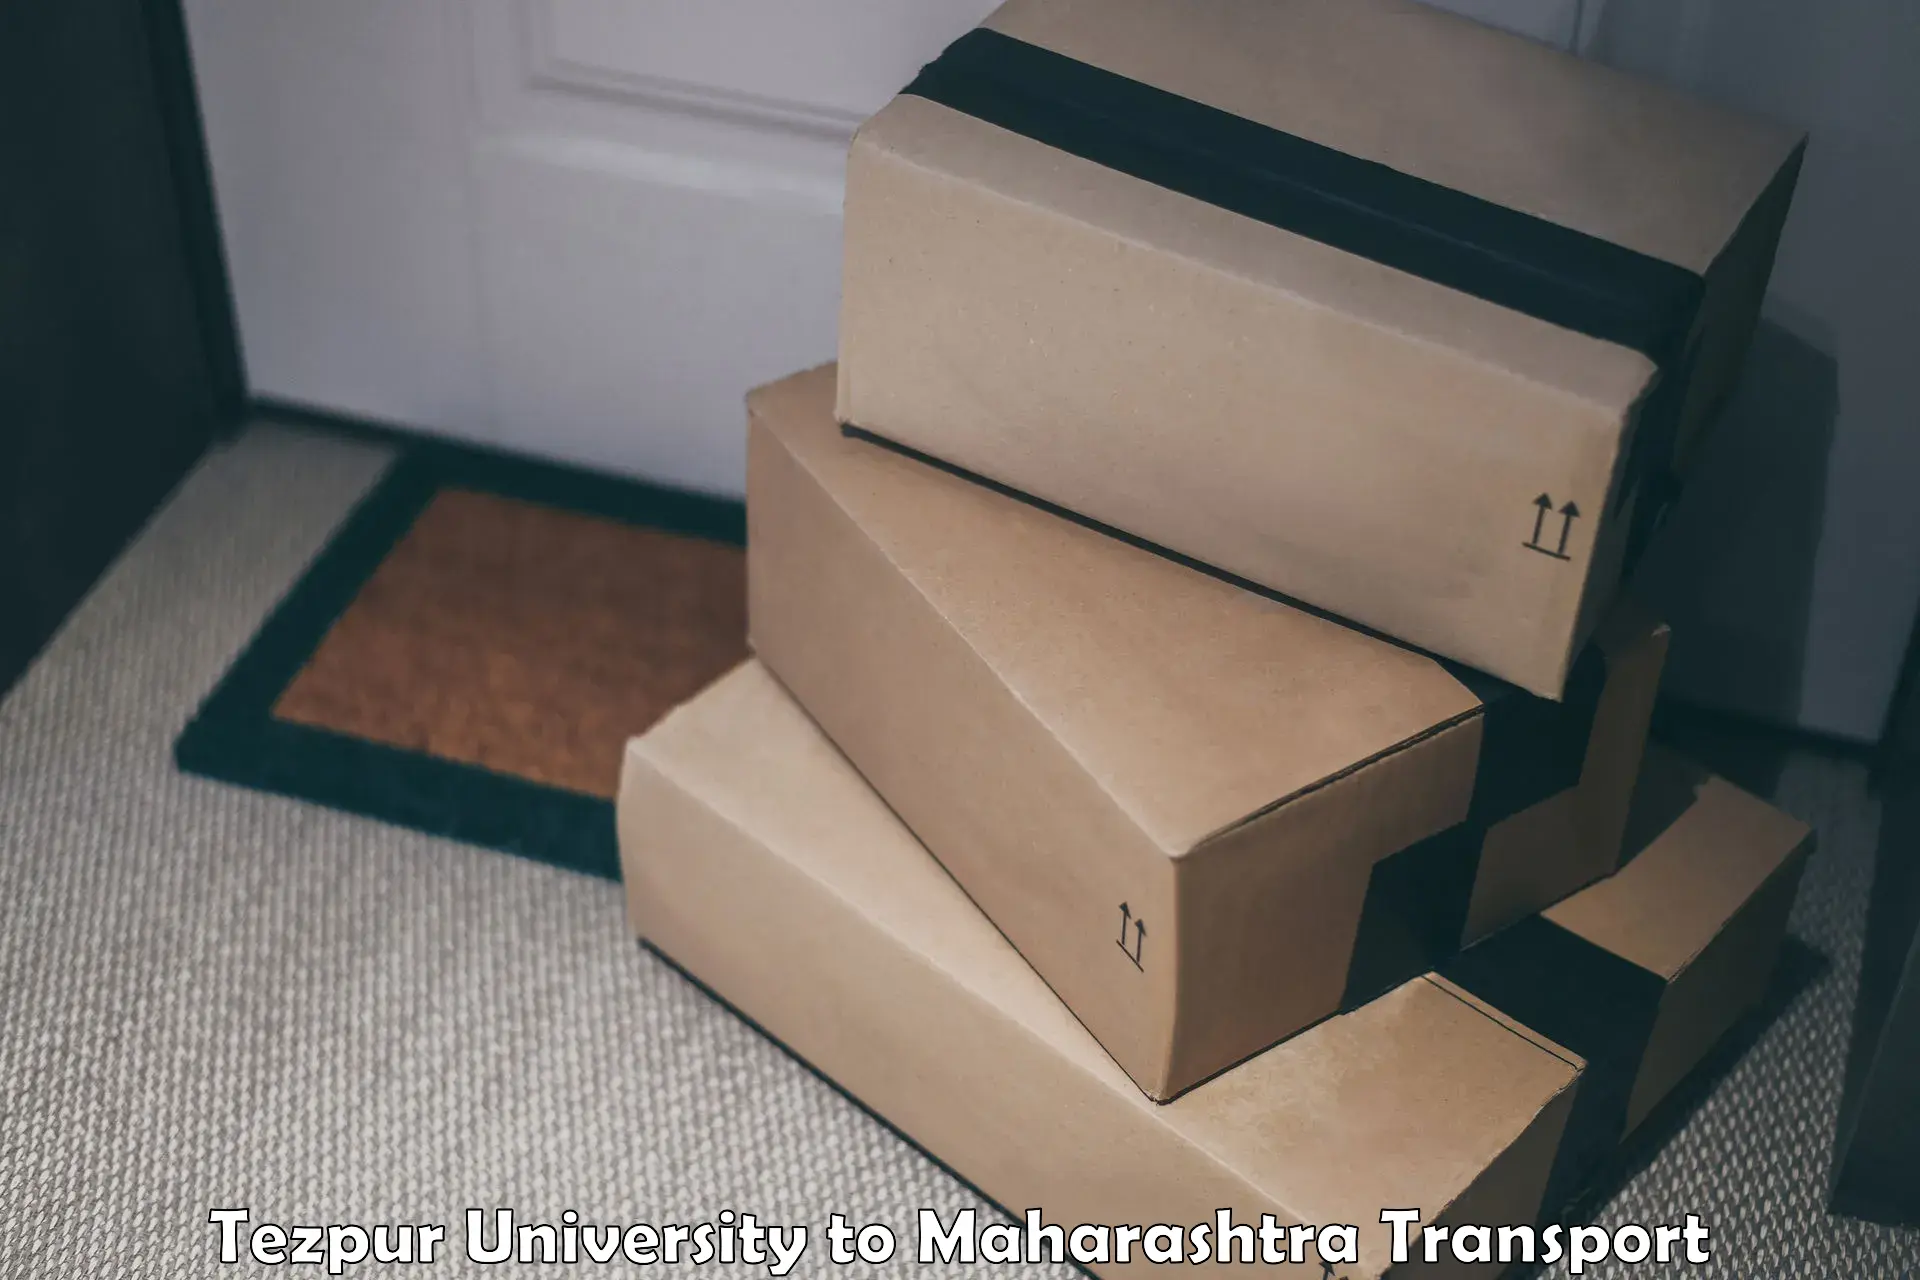 Cargo transportation services Tezpur University to Dharmabad